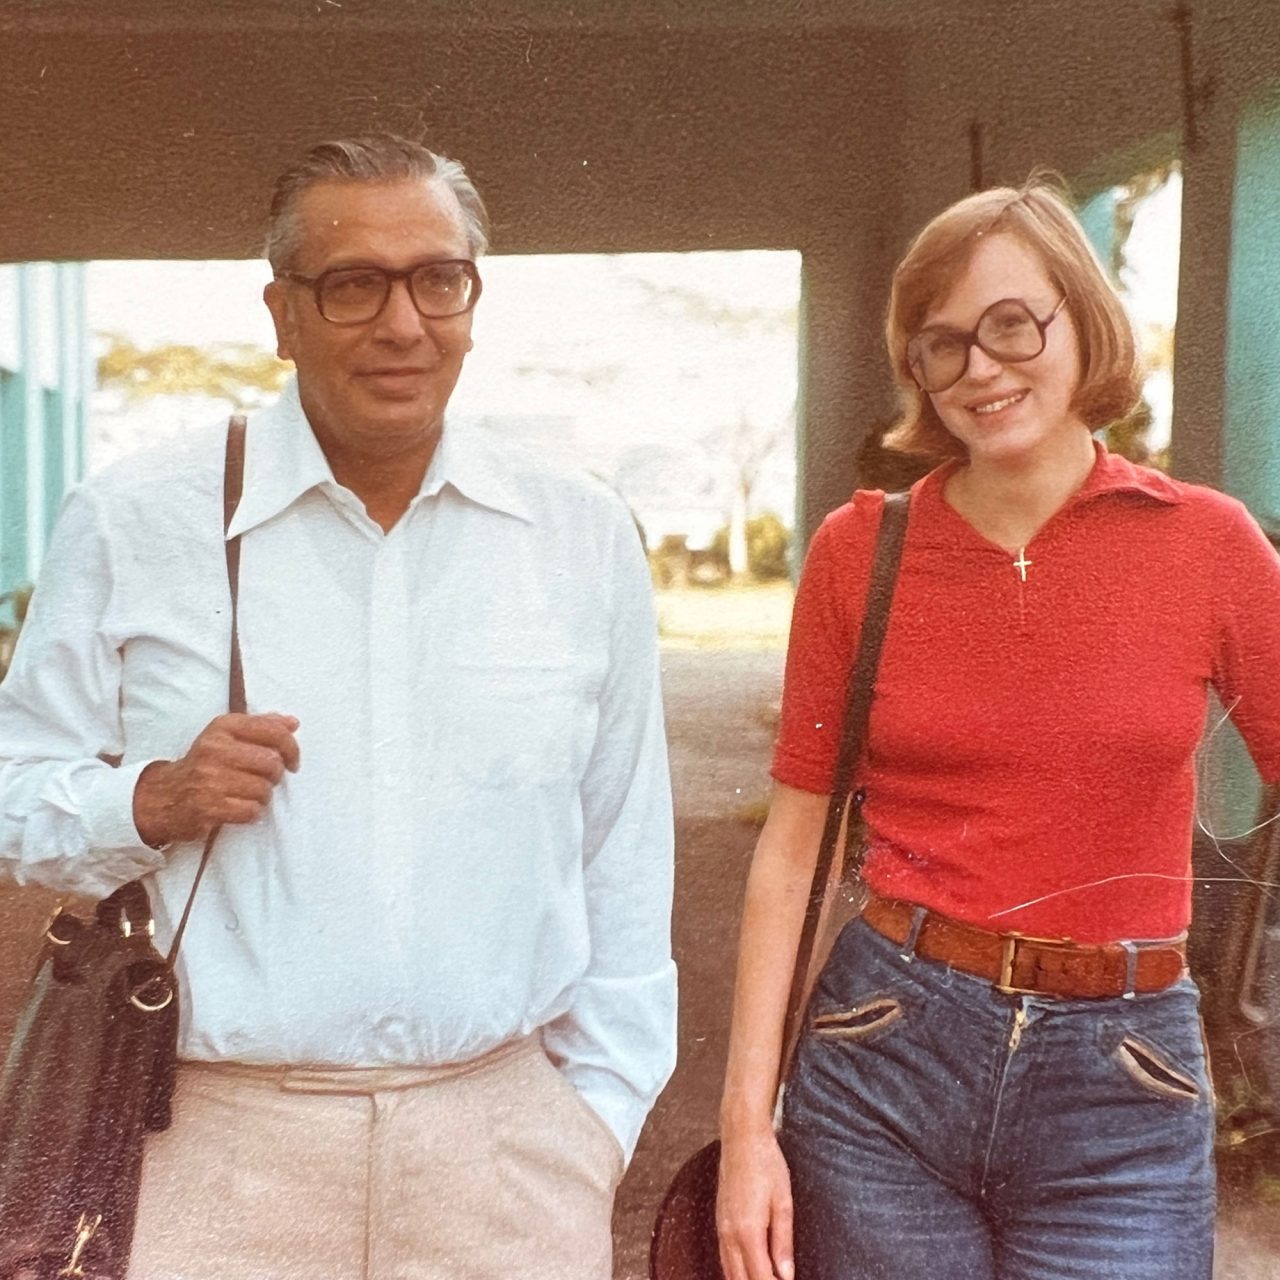 Grey-haired man, Mr. Nath, in glasses and white shirt stands with young woman Ann-Christin Karlsson in jeans and red shirt.